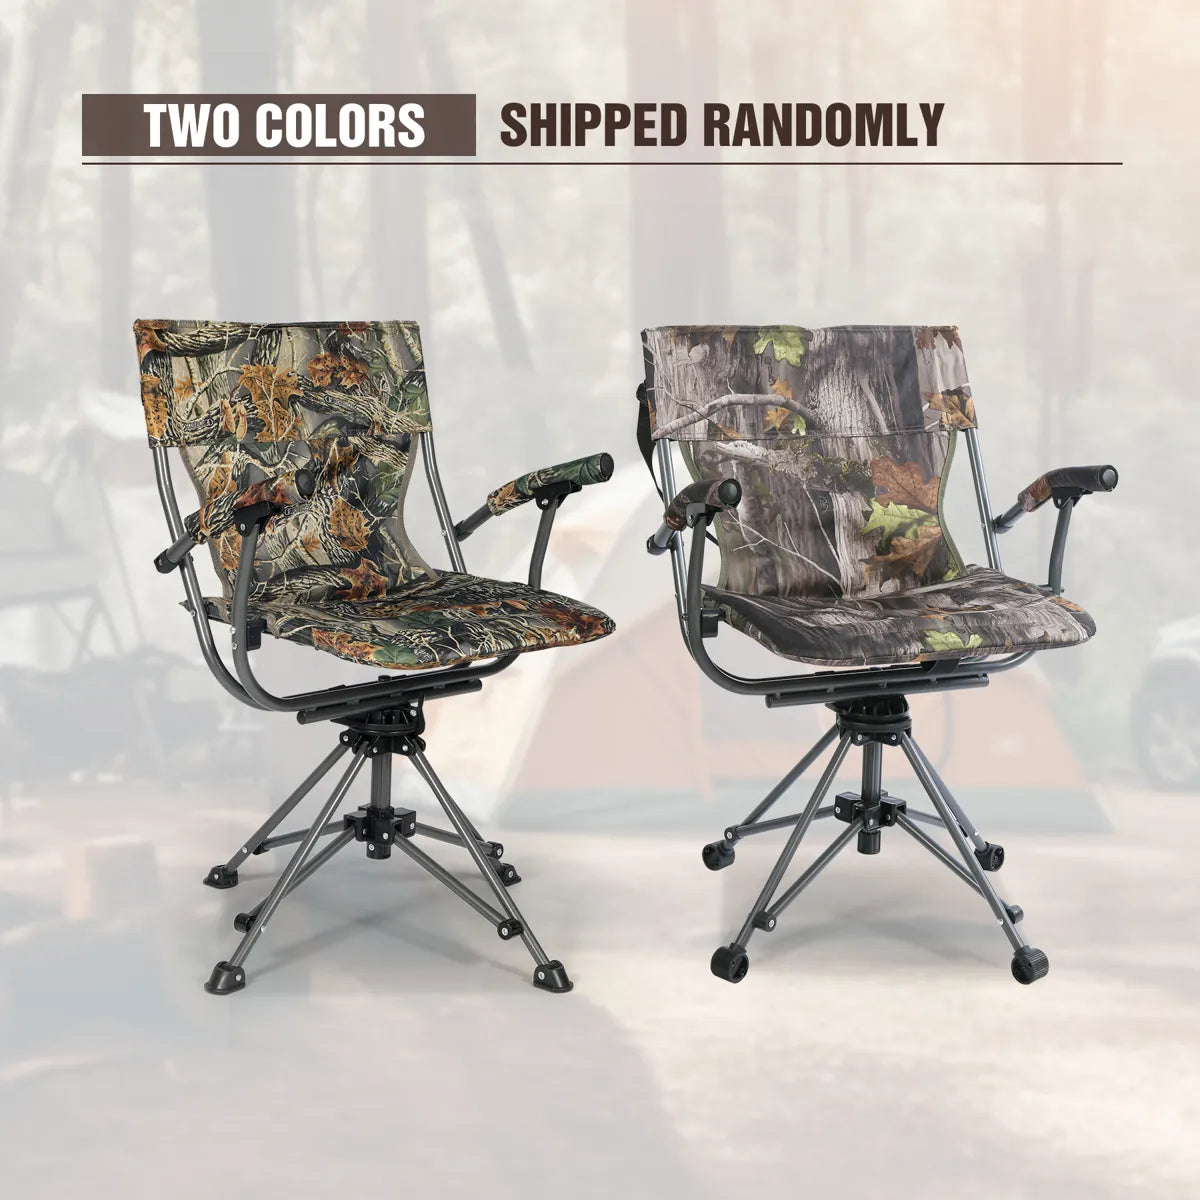 REDCAMP 360 Degree Swivel Hunting Chair for Blinds